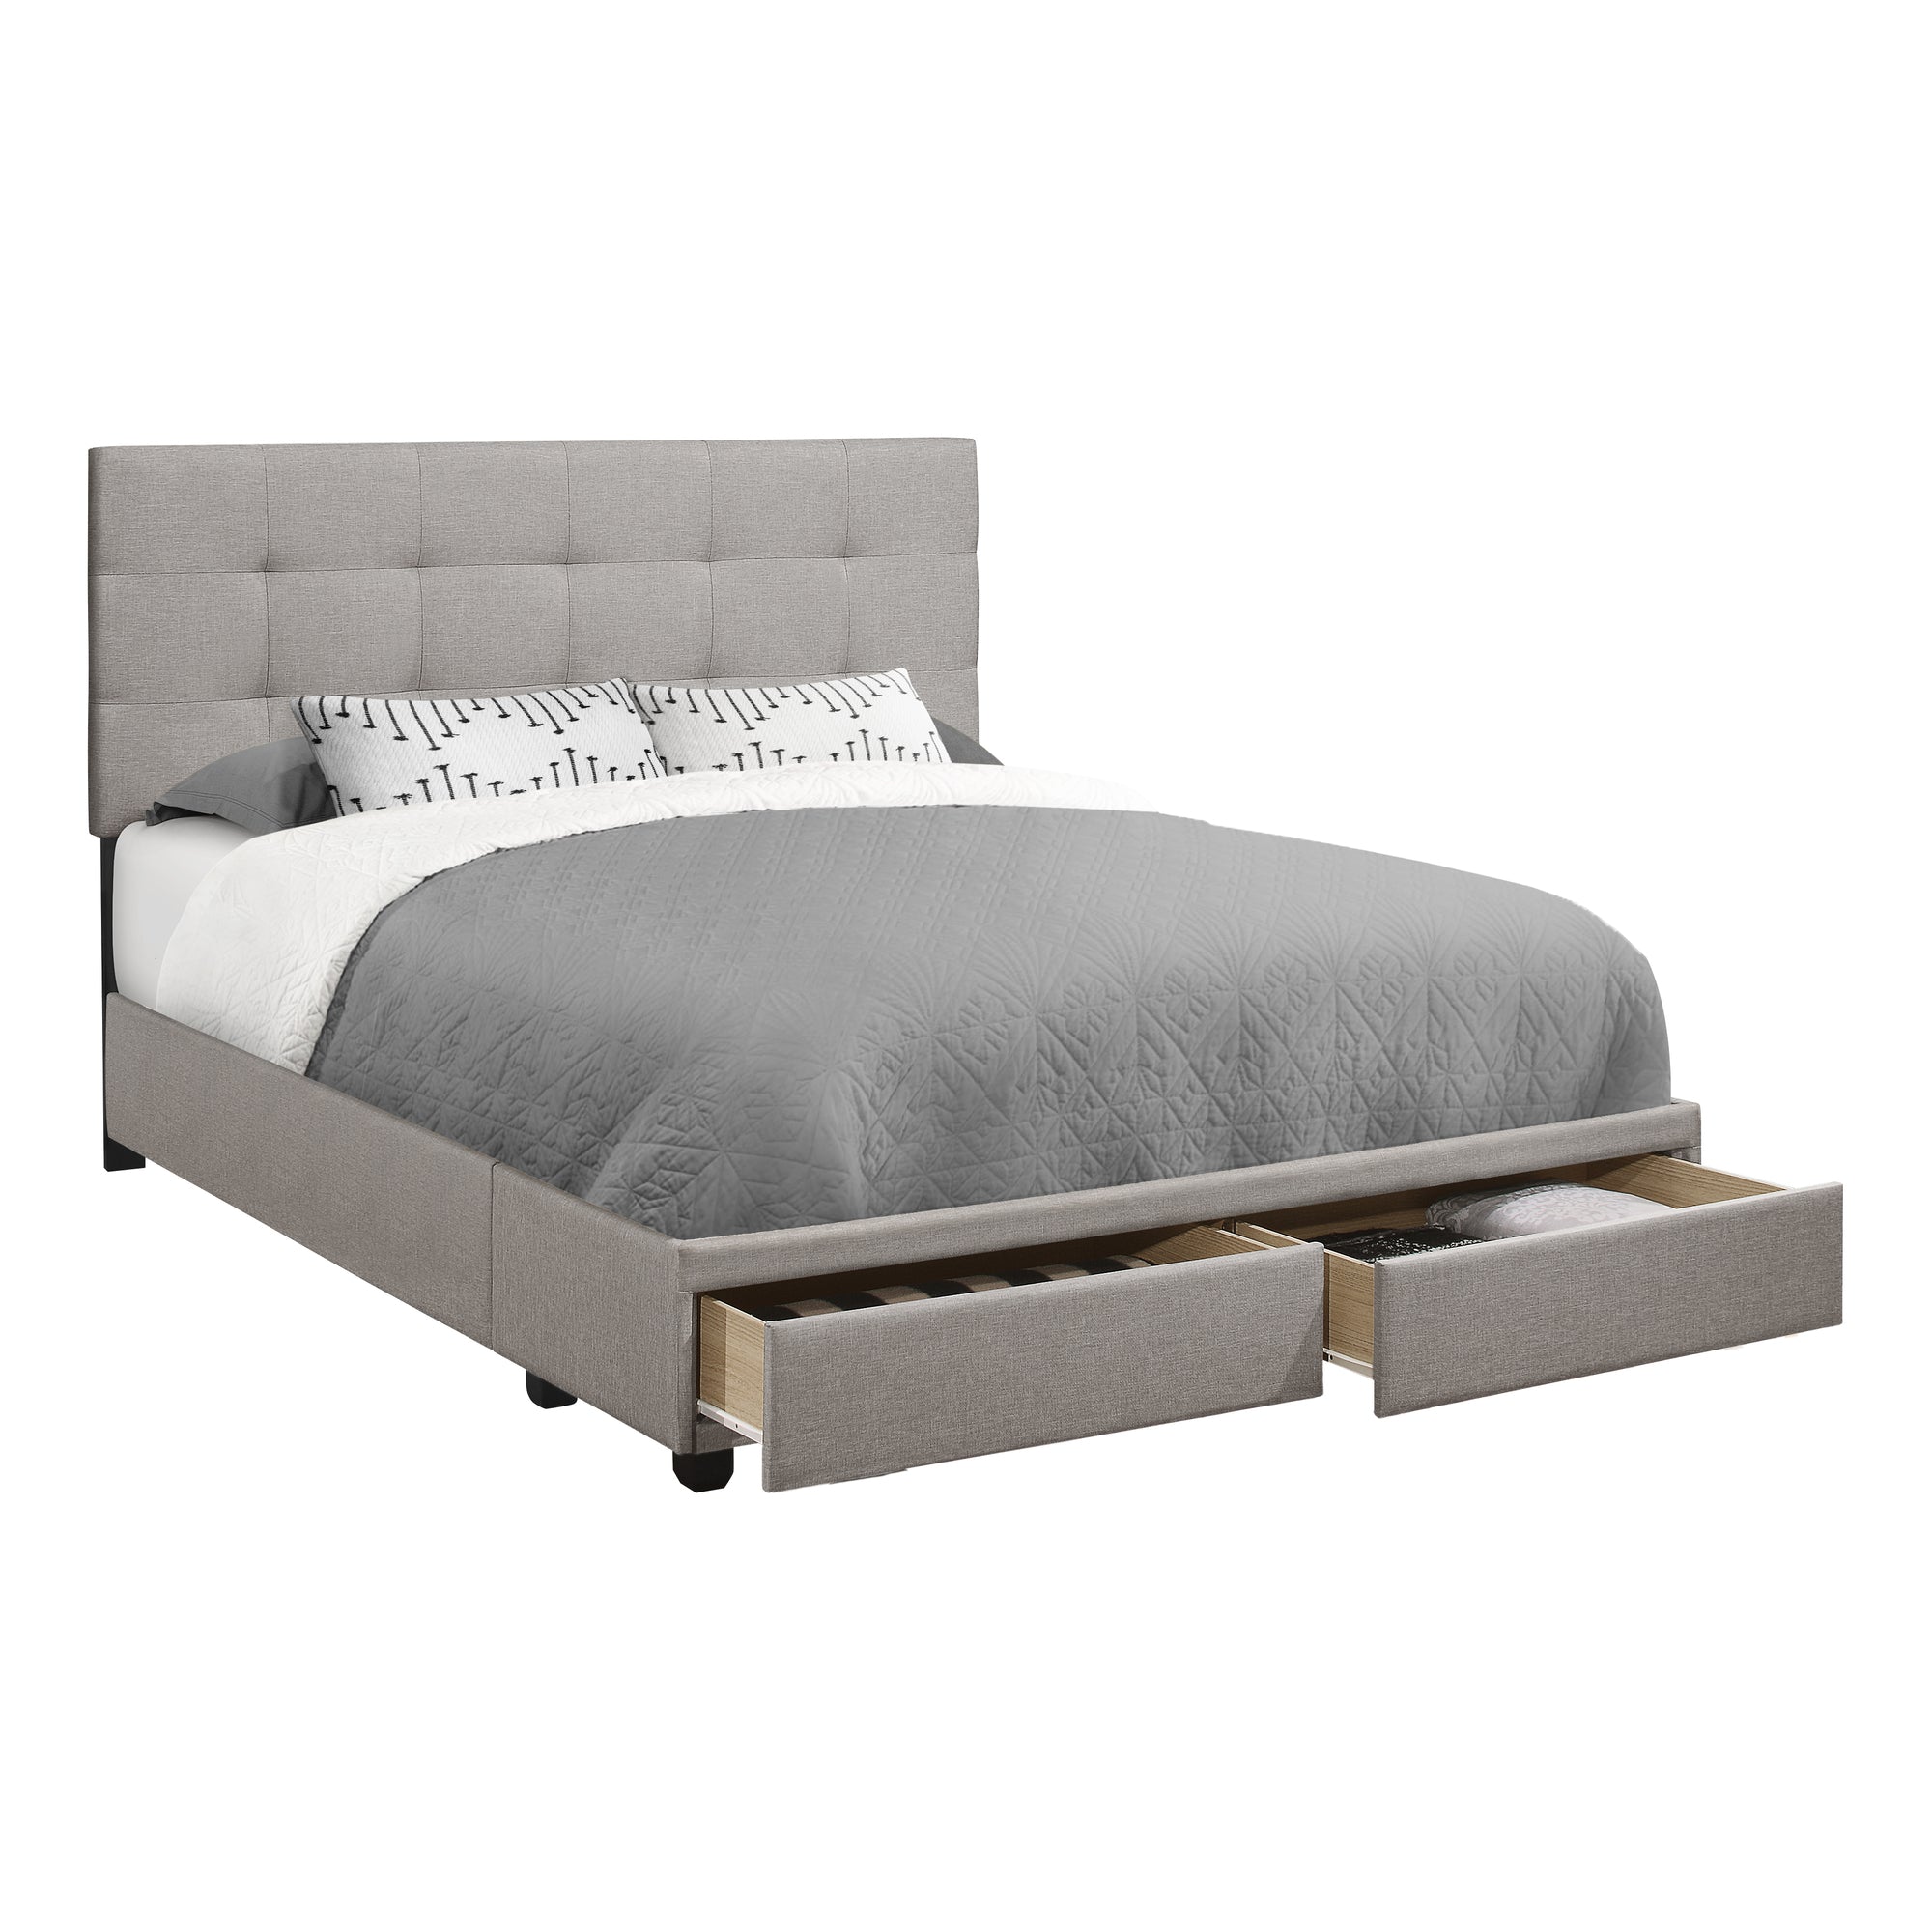 Bed - Queen Size / Grey Linen With 2 Storage Drawers